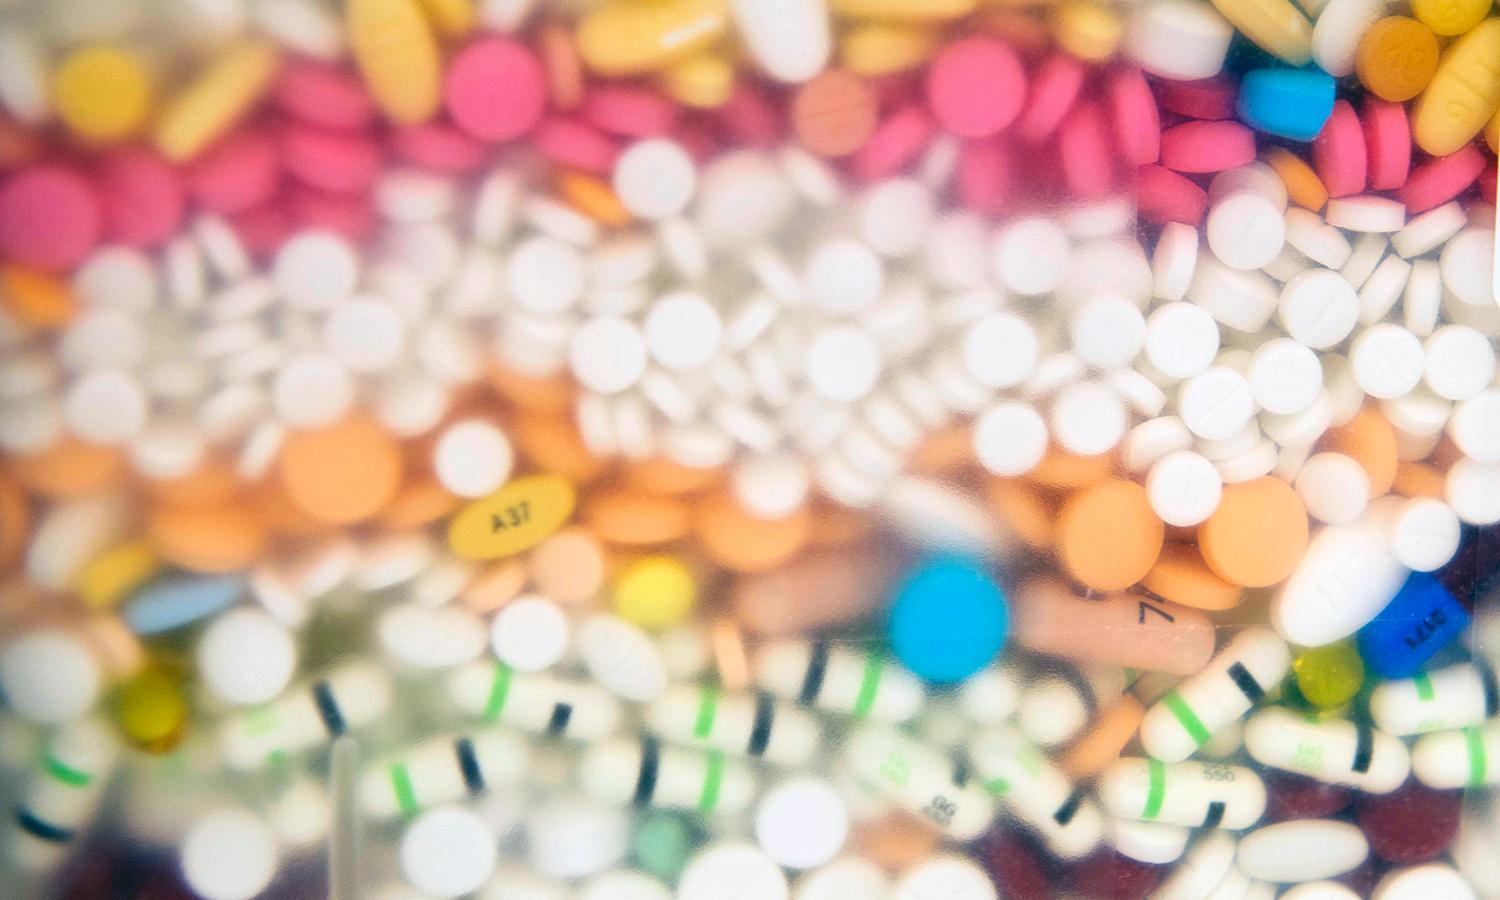 Multiple layers of pills of different colors sit in a pharmacy's pill disposal container.